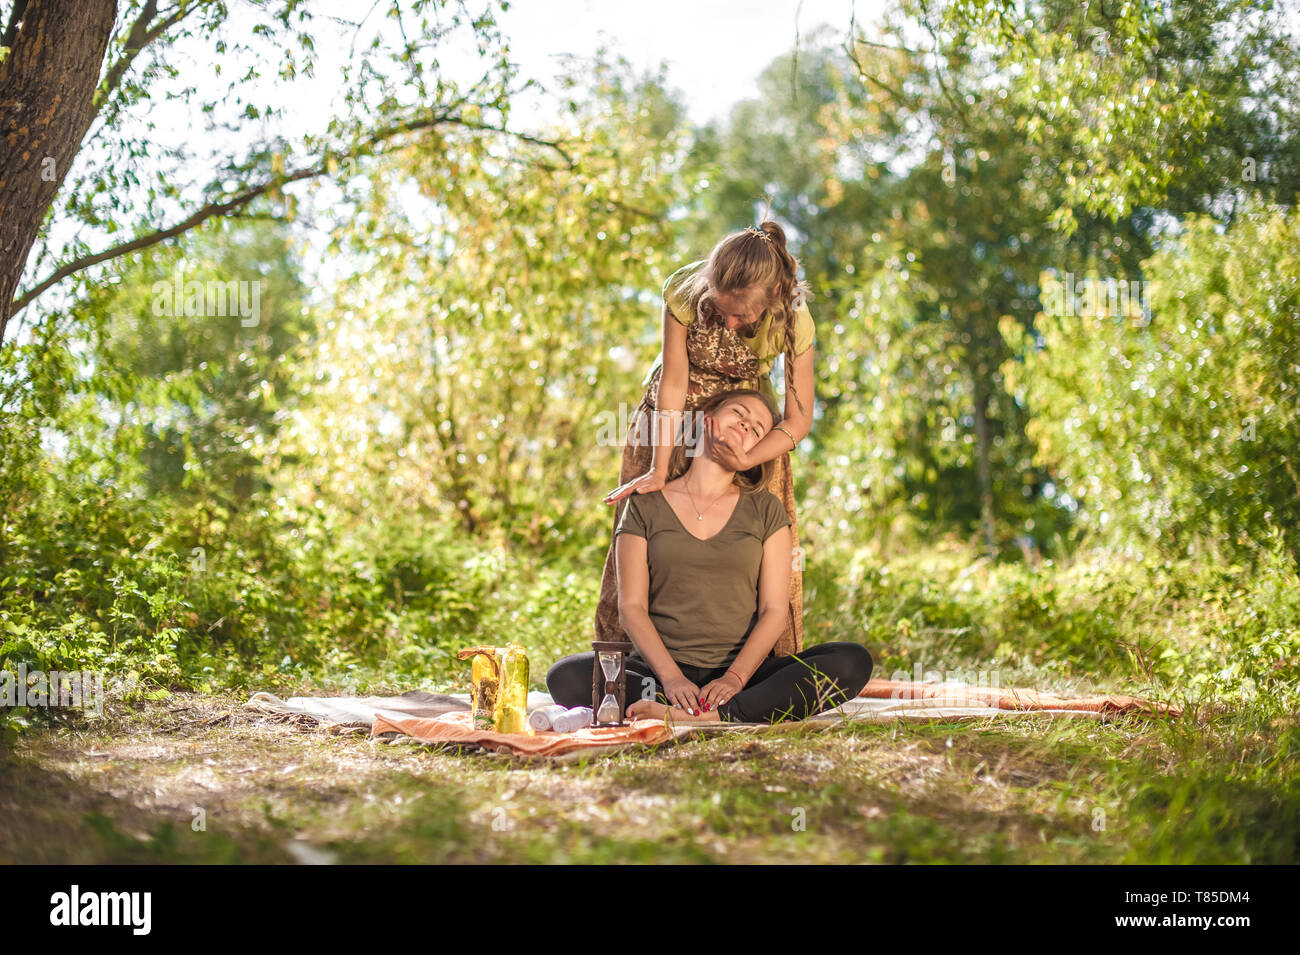 Master massage therapist thuroughly massages a girl in nature Stock Photo -  Alamy